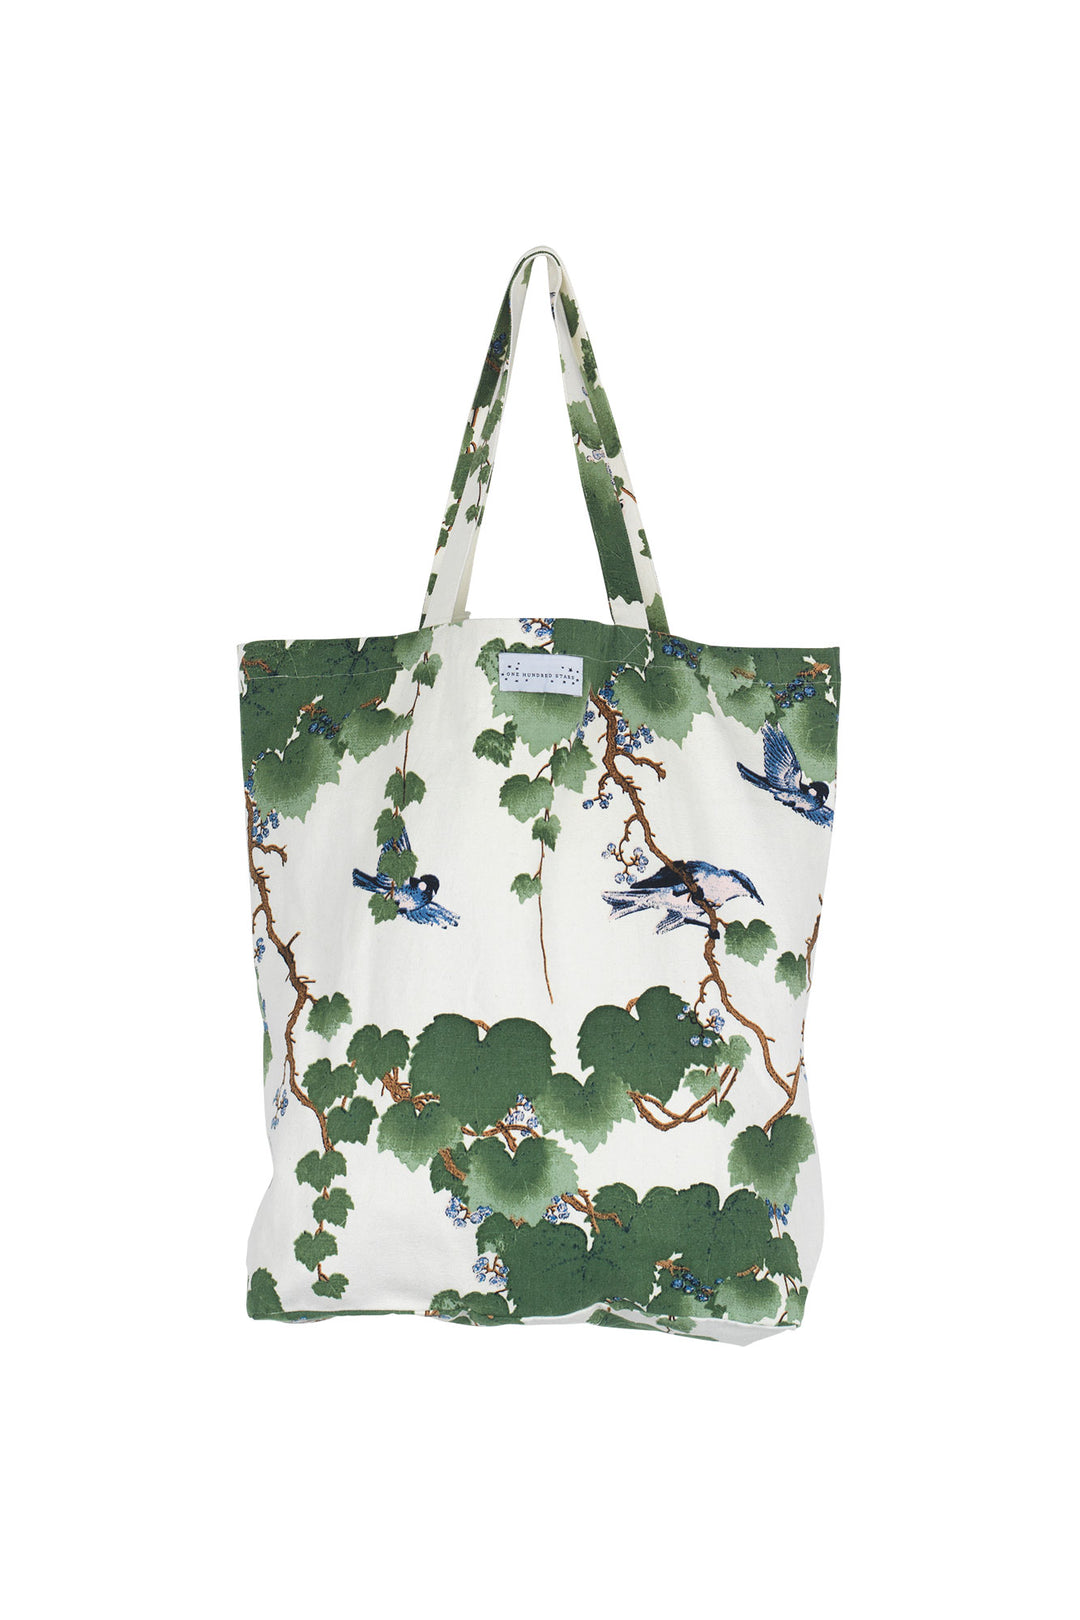 Acer Green printed canvas tote bag, use as a shopping bag or beach bag. reusable and sustainable by One Hundred Stars